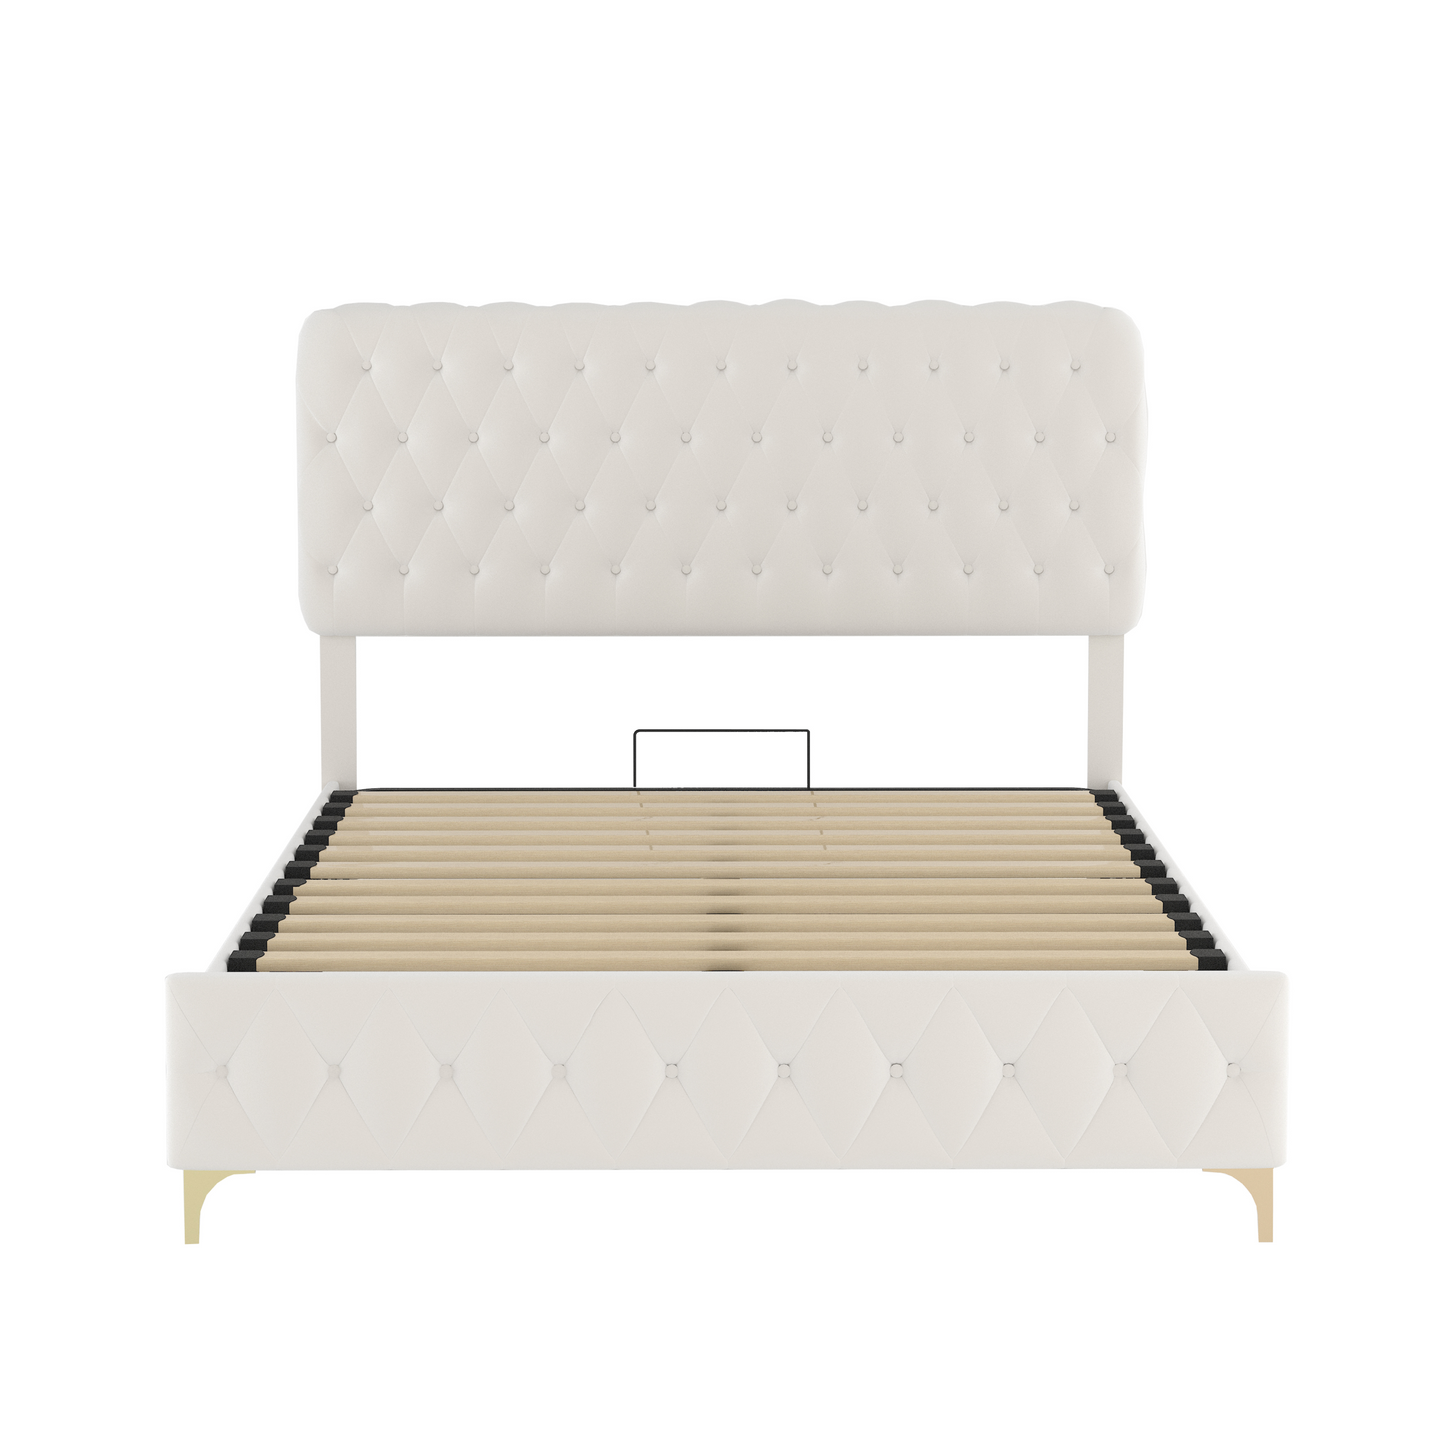 Queen Velvet Upholstered Platform Bed Frame With Pneumatic Hydraulic Function,  with Deep Tufted Buttons, Lift Up Storage Bed With Hidden Underbed Oversized Storage, Beige